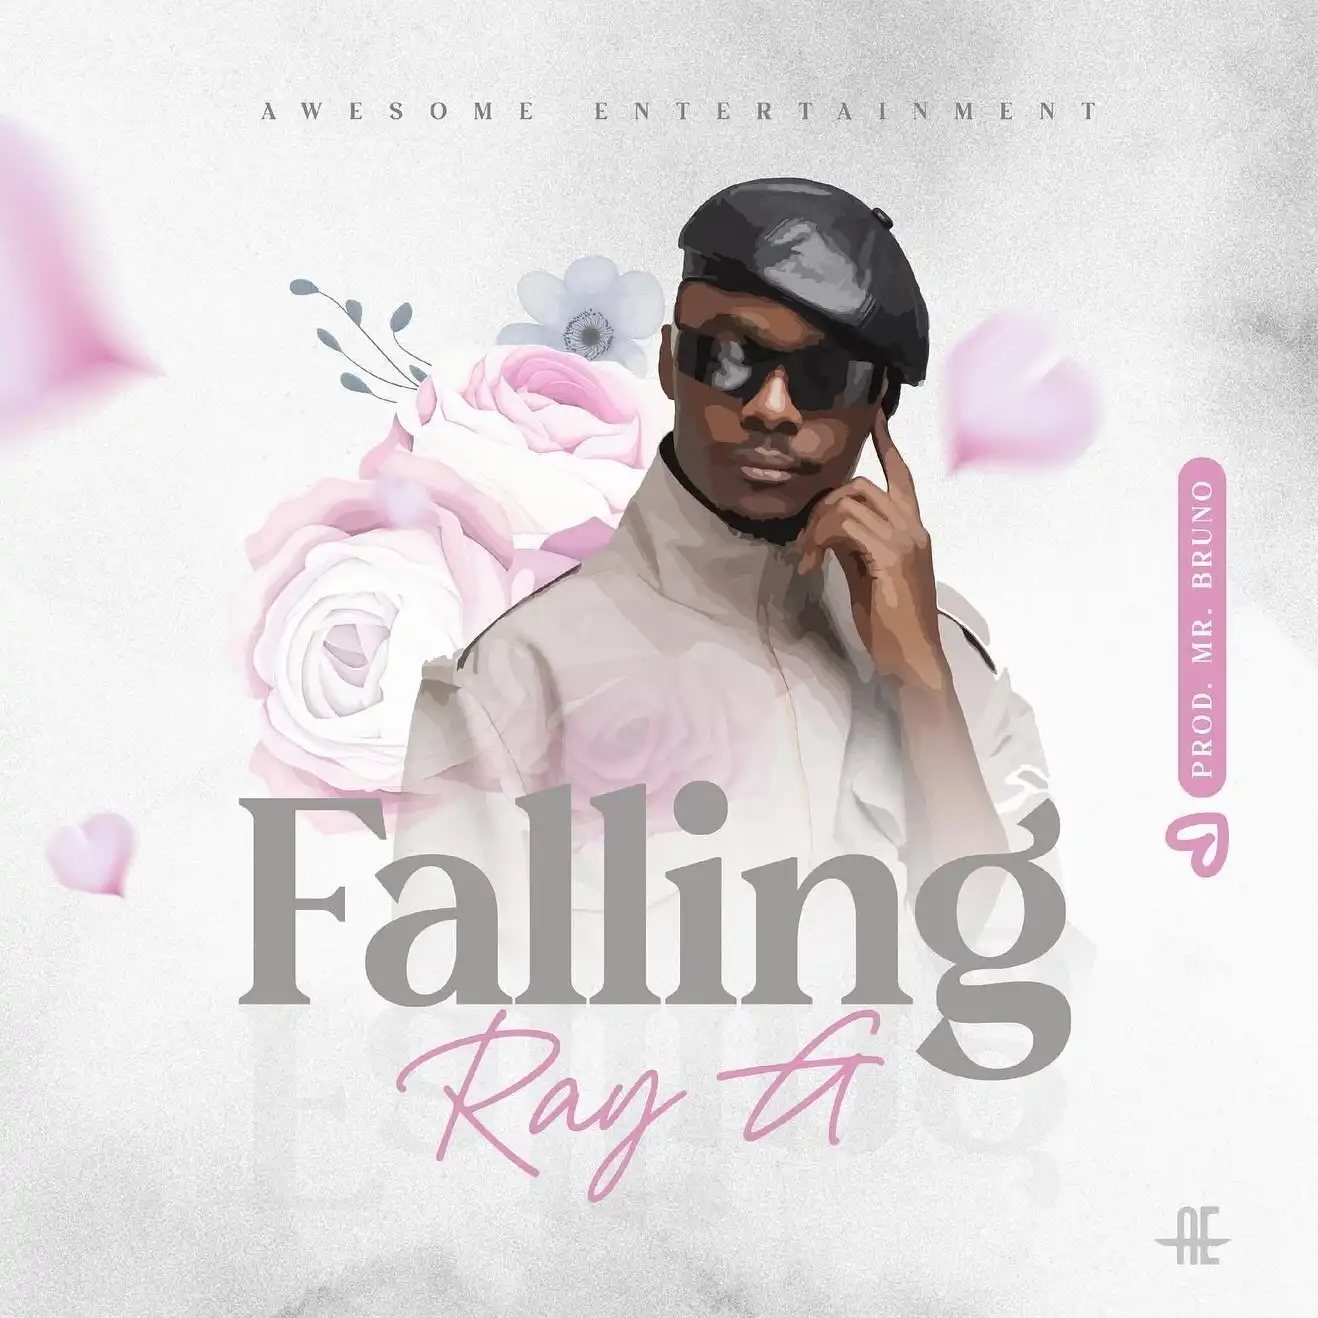 ray-g-falling-album-cover